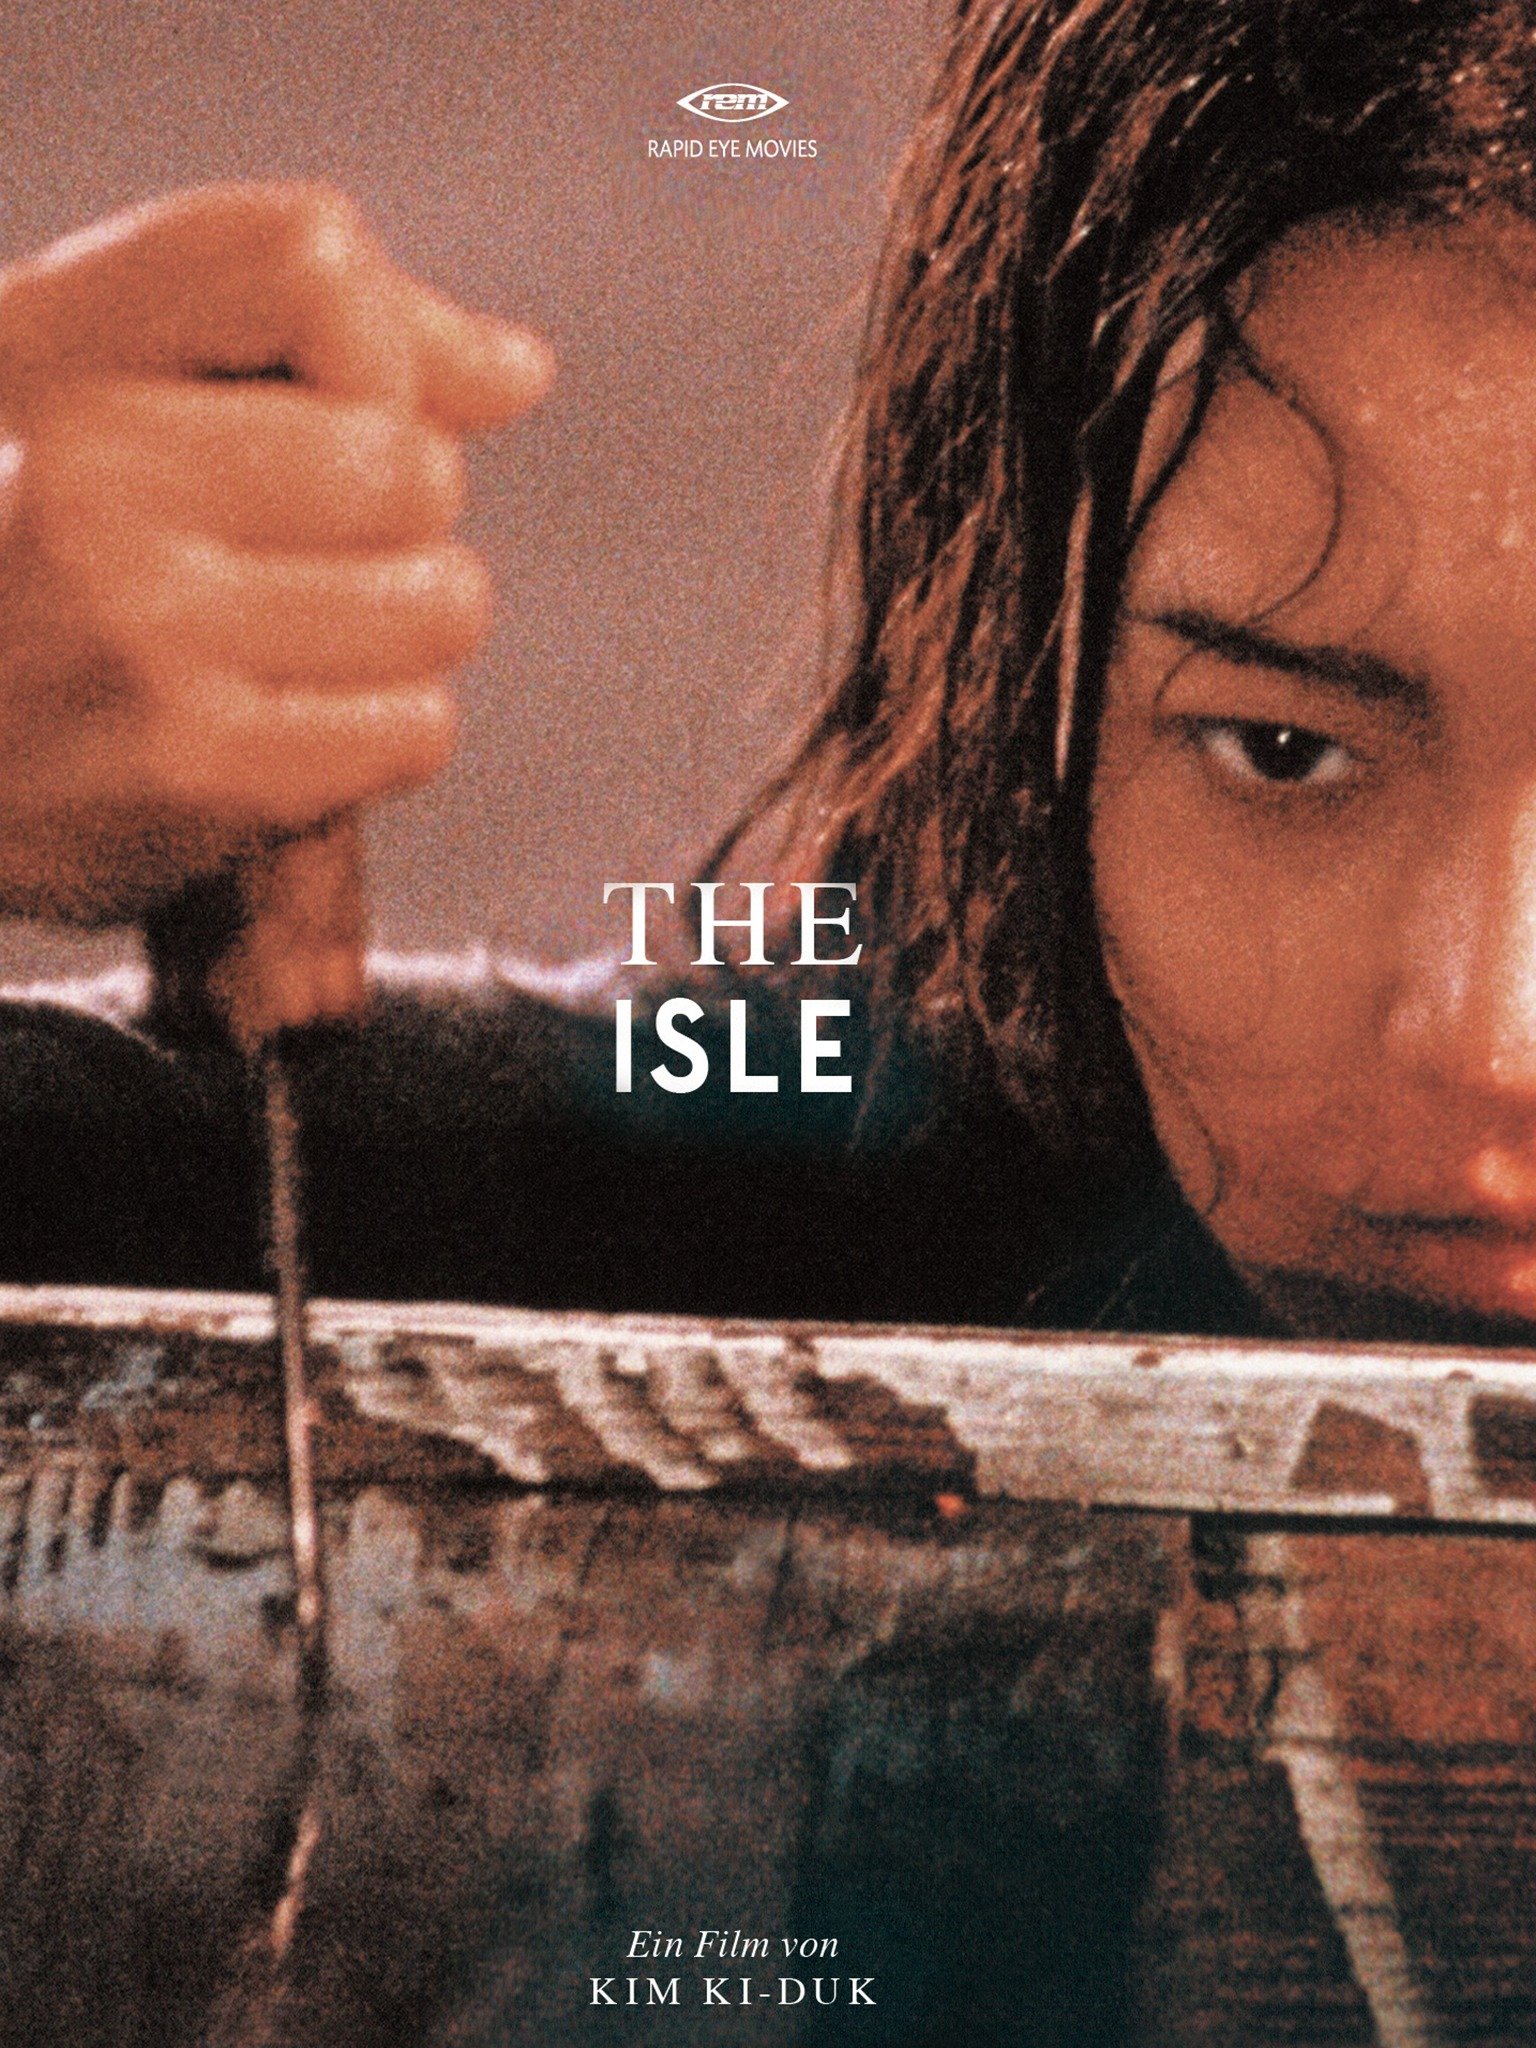 The Isle 2000 Rotten Tomatoes